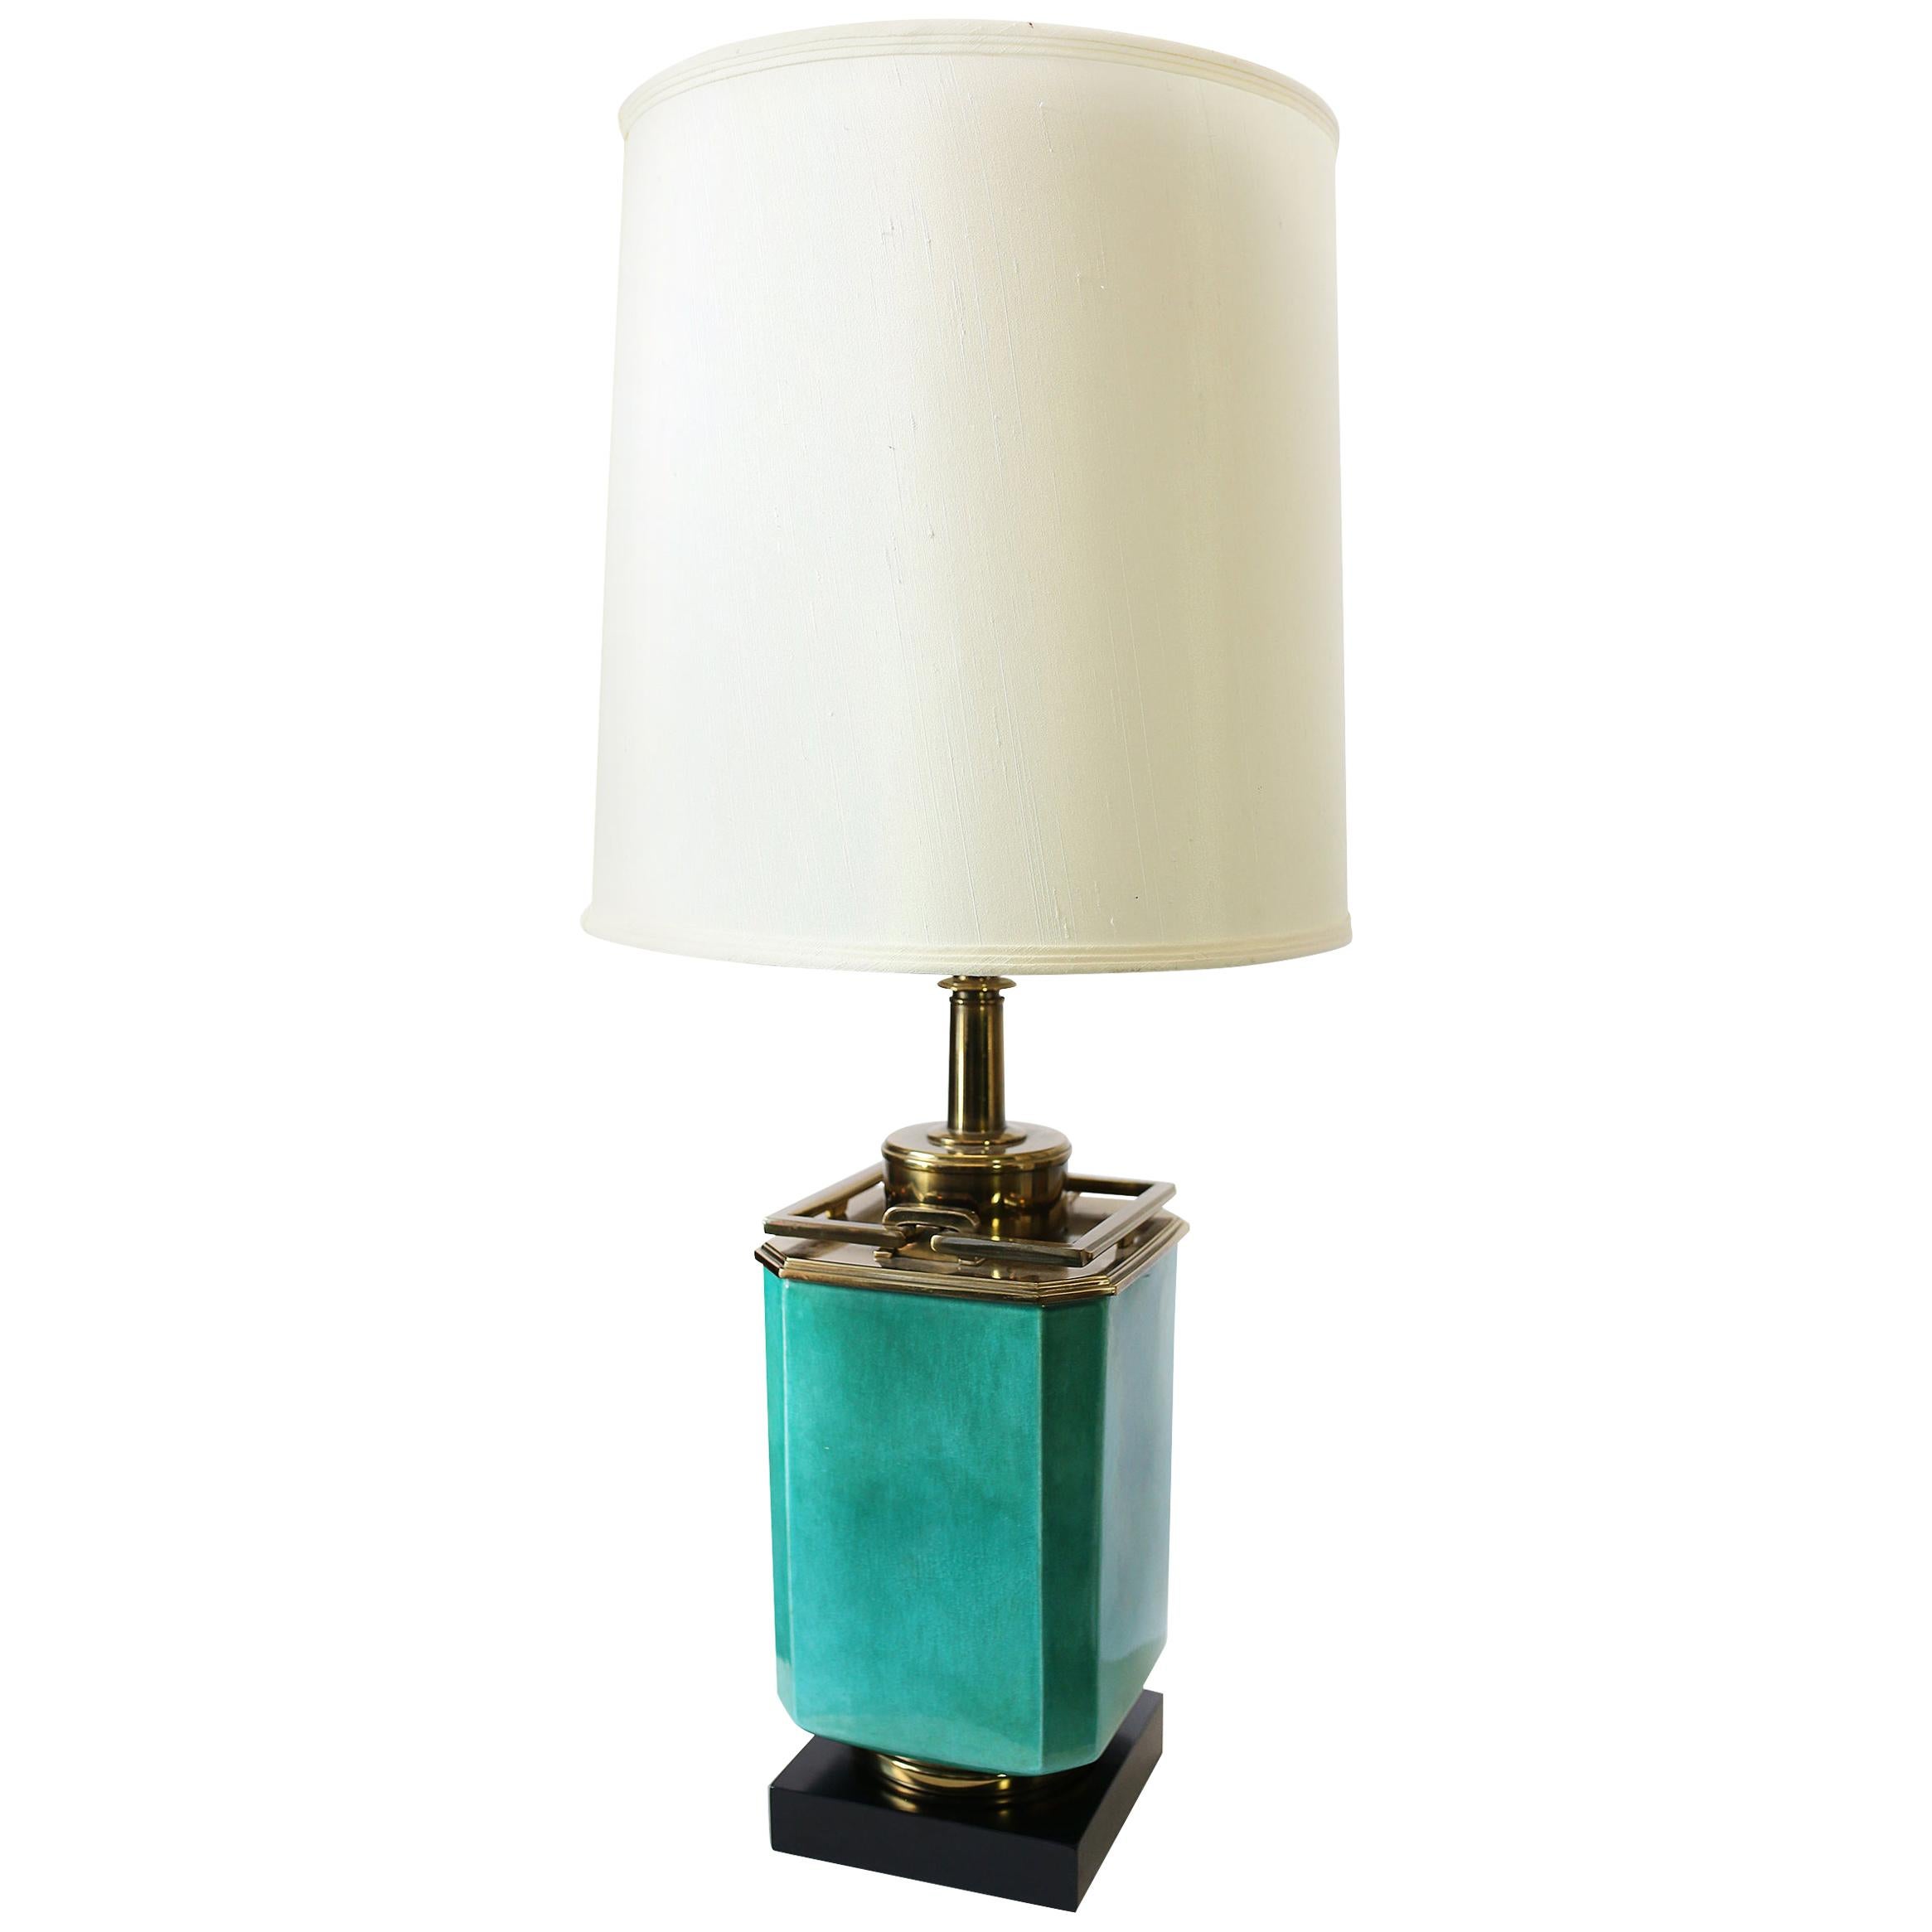 Vintage 1950s Large Turquoise and Brass Table Lamp by Edwin Cole for Stiffel